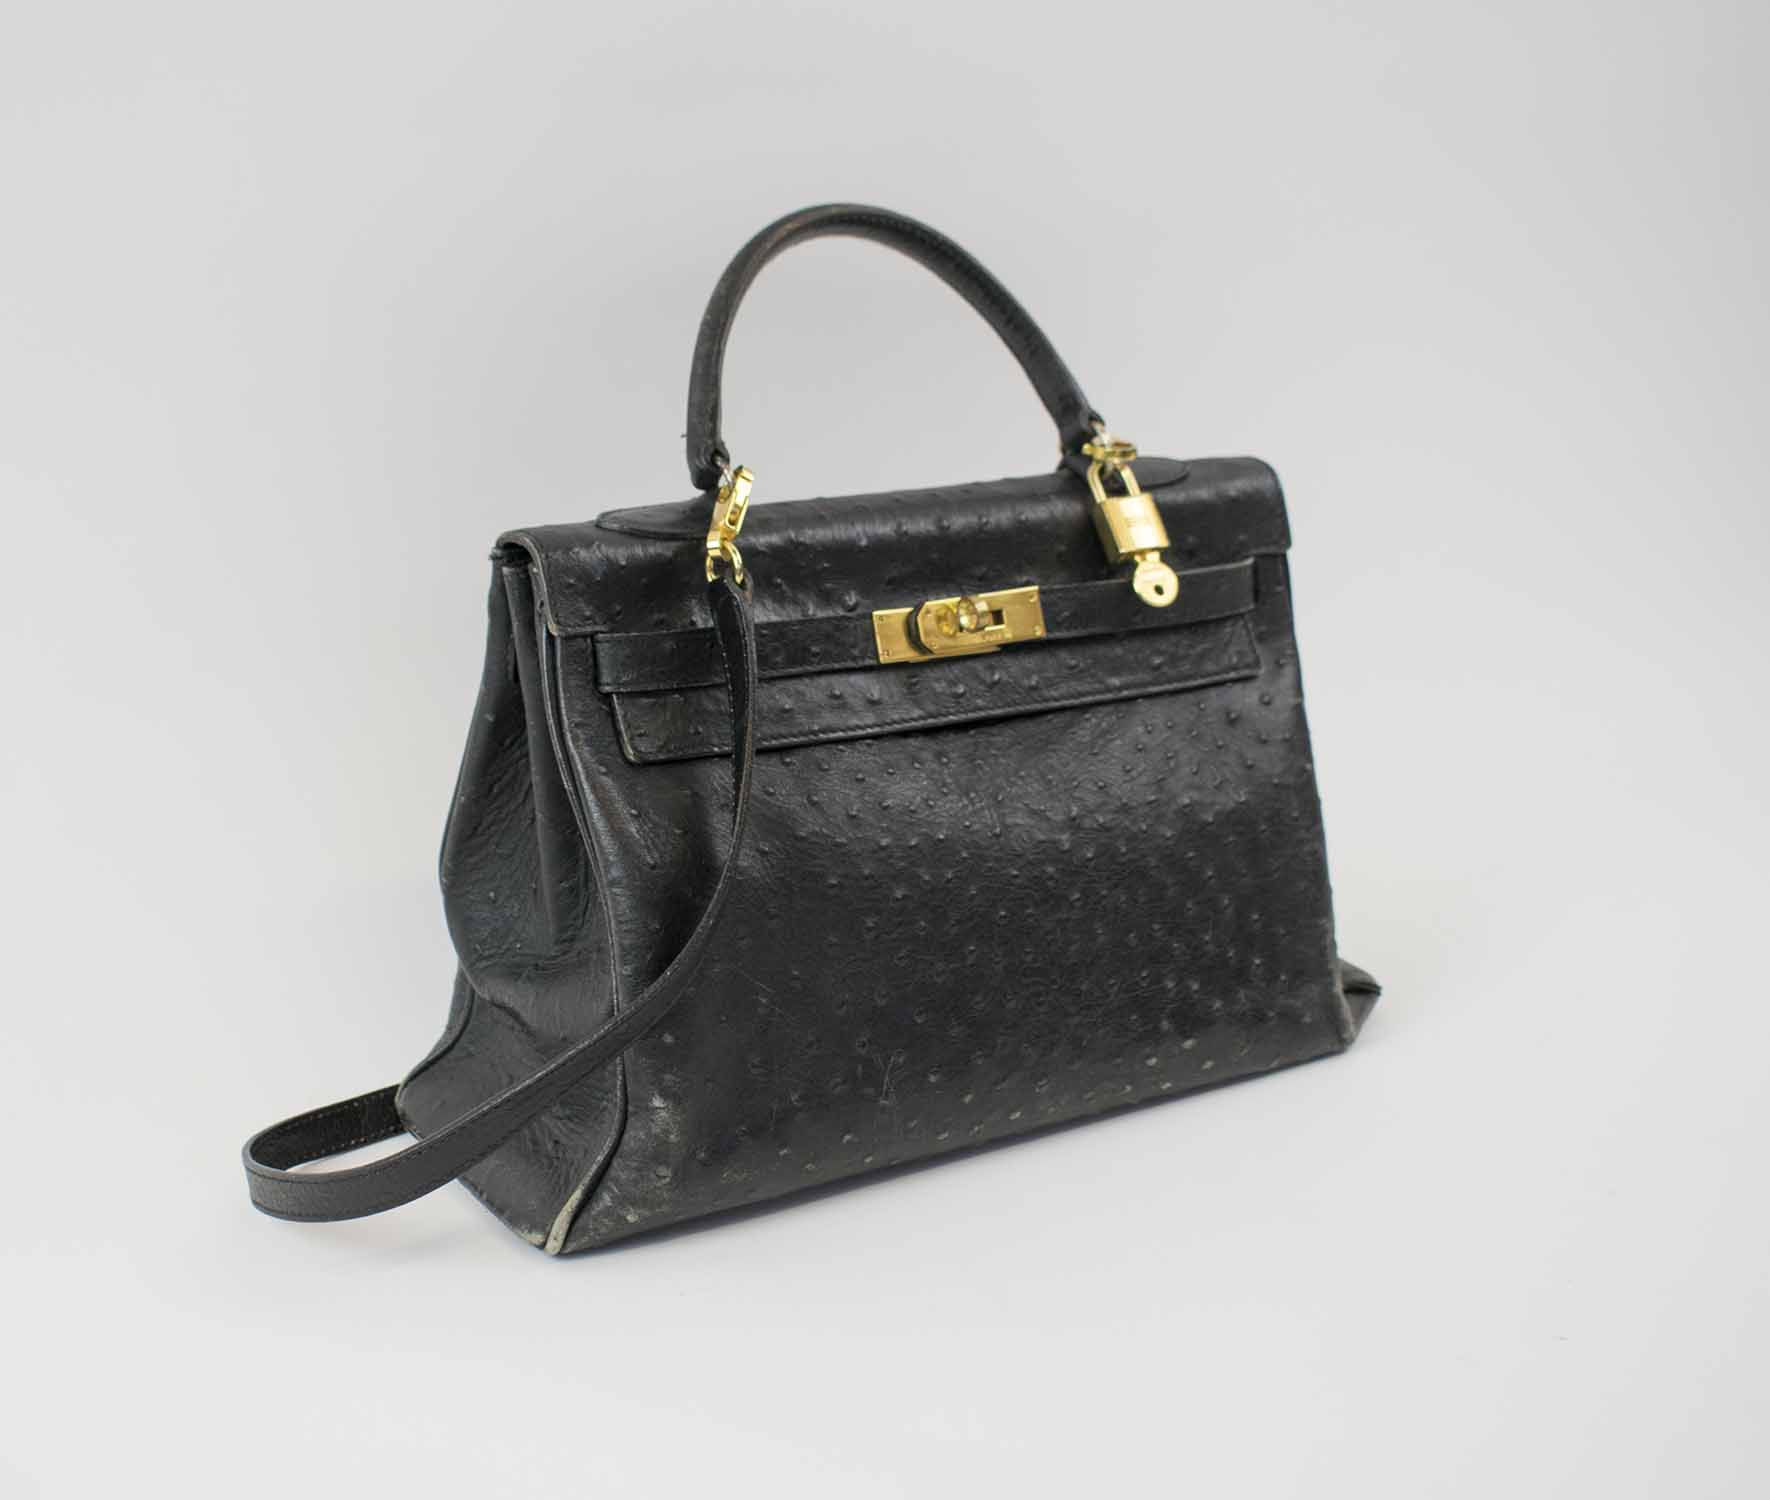 Hermes Black Ostrich 32 cm Kelly with Gold Hardware